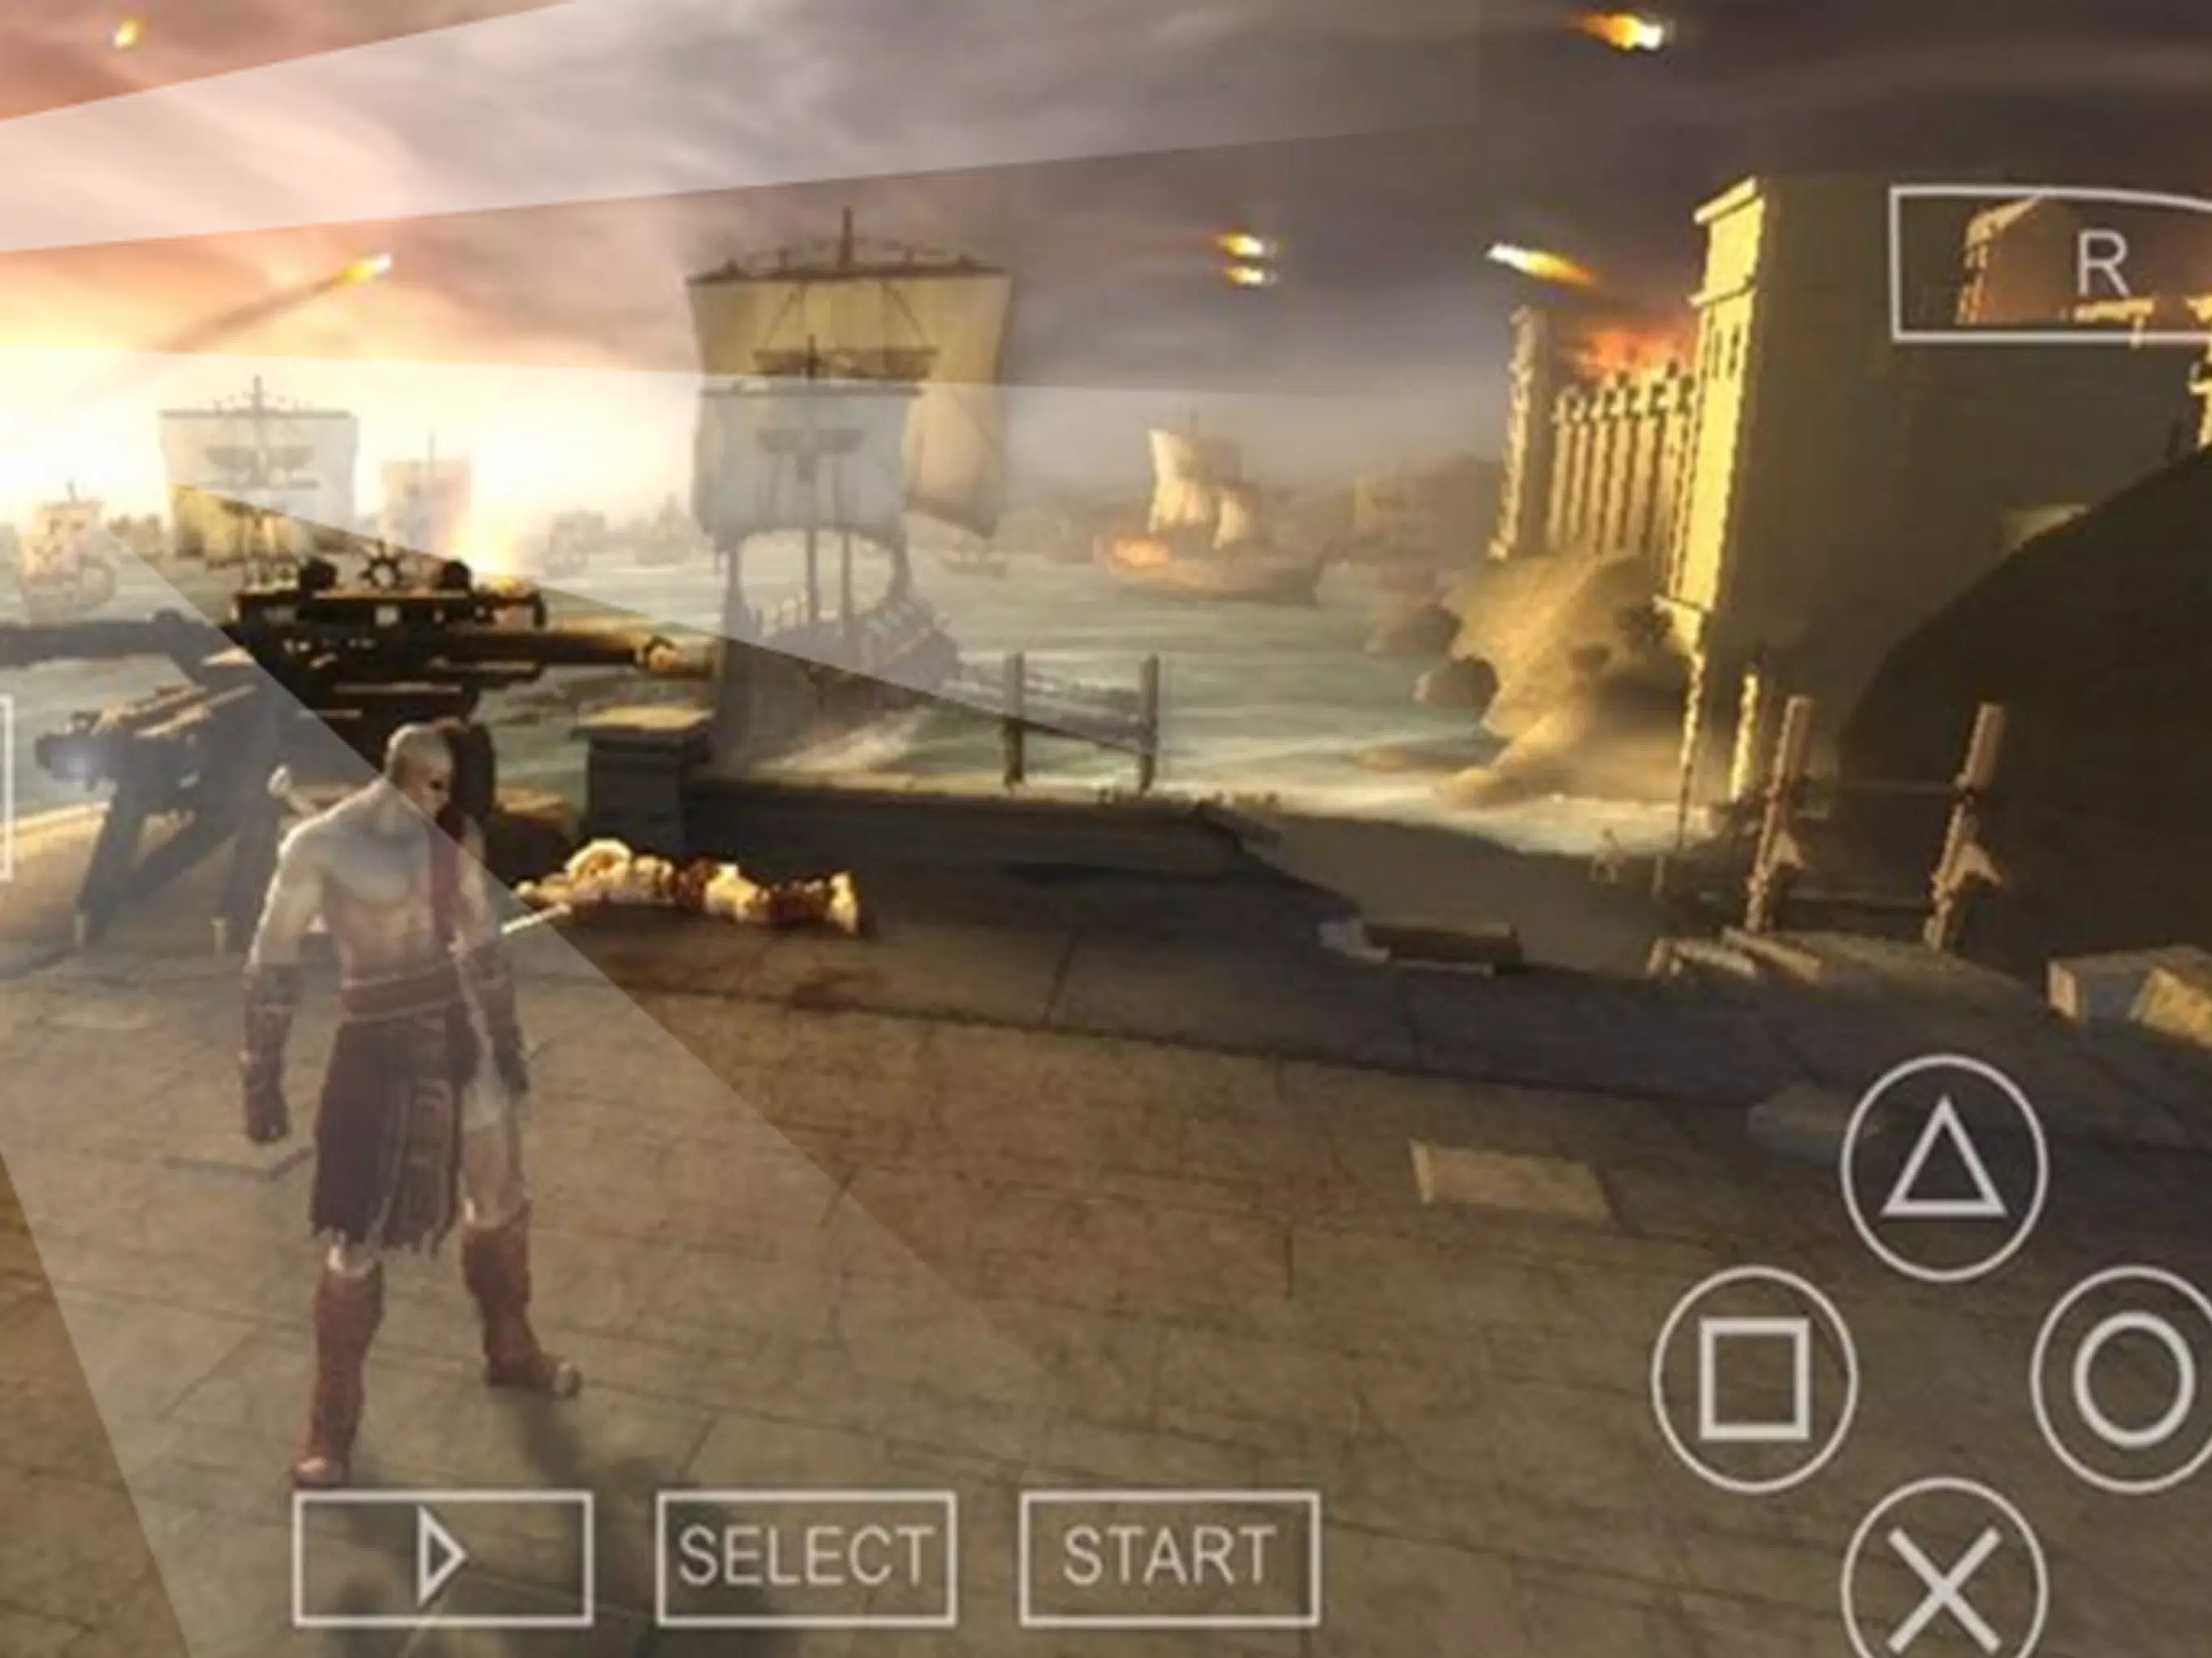 Ppsspp iso emulator game psp for Android - APK Download